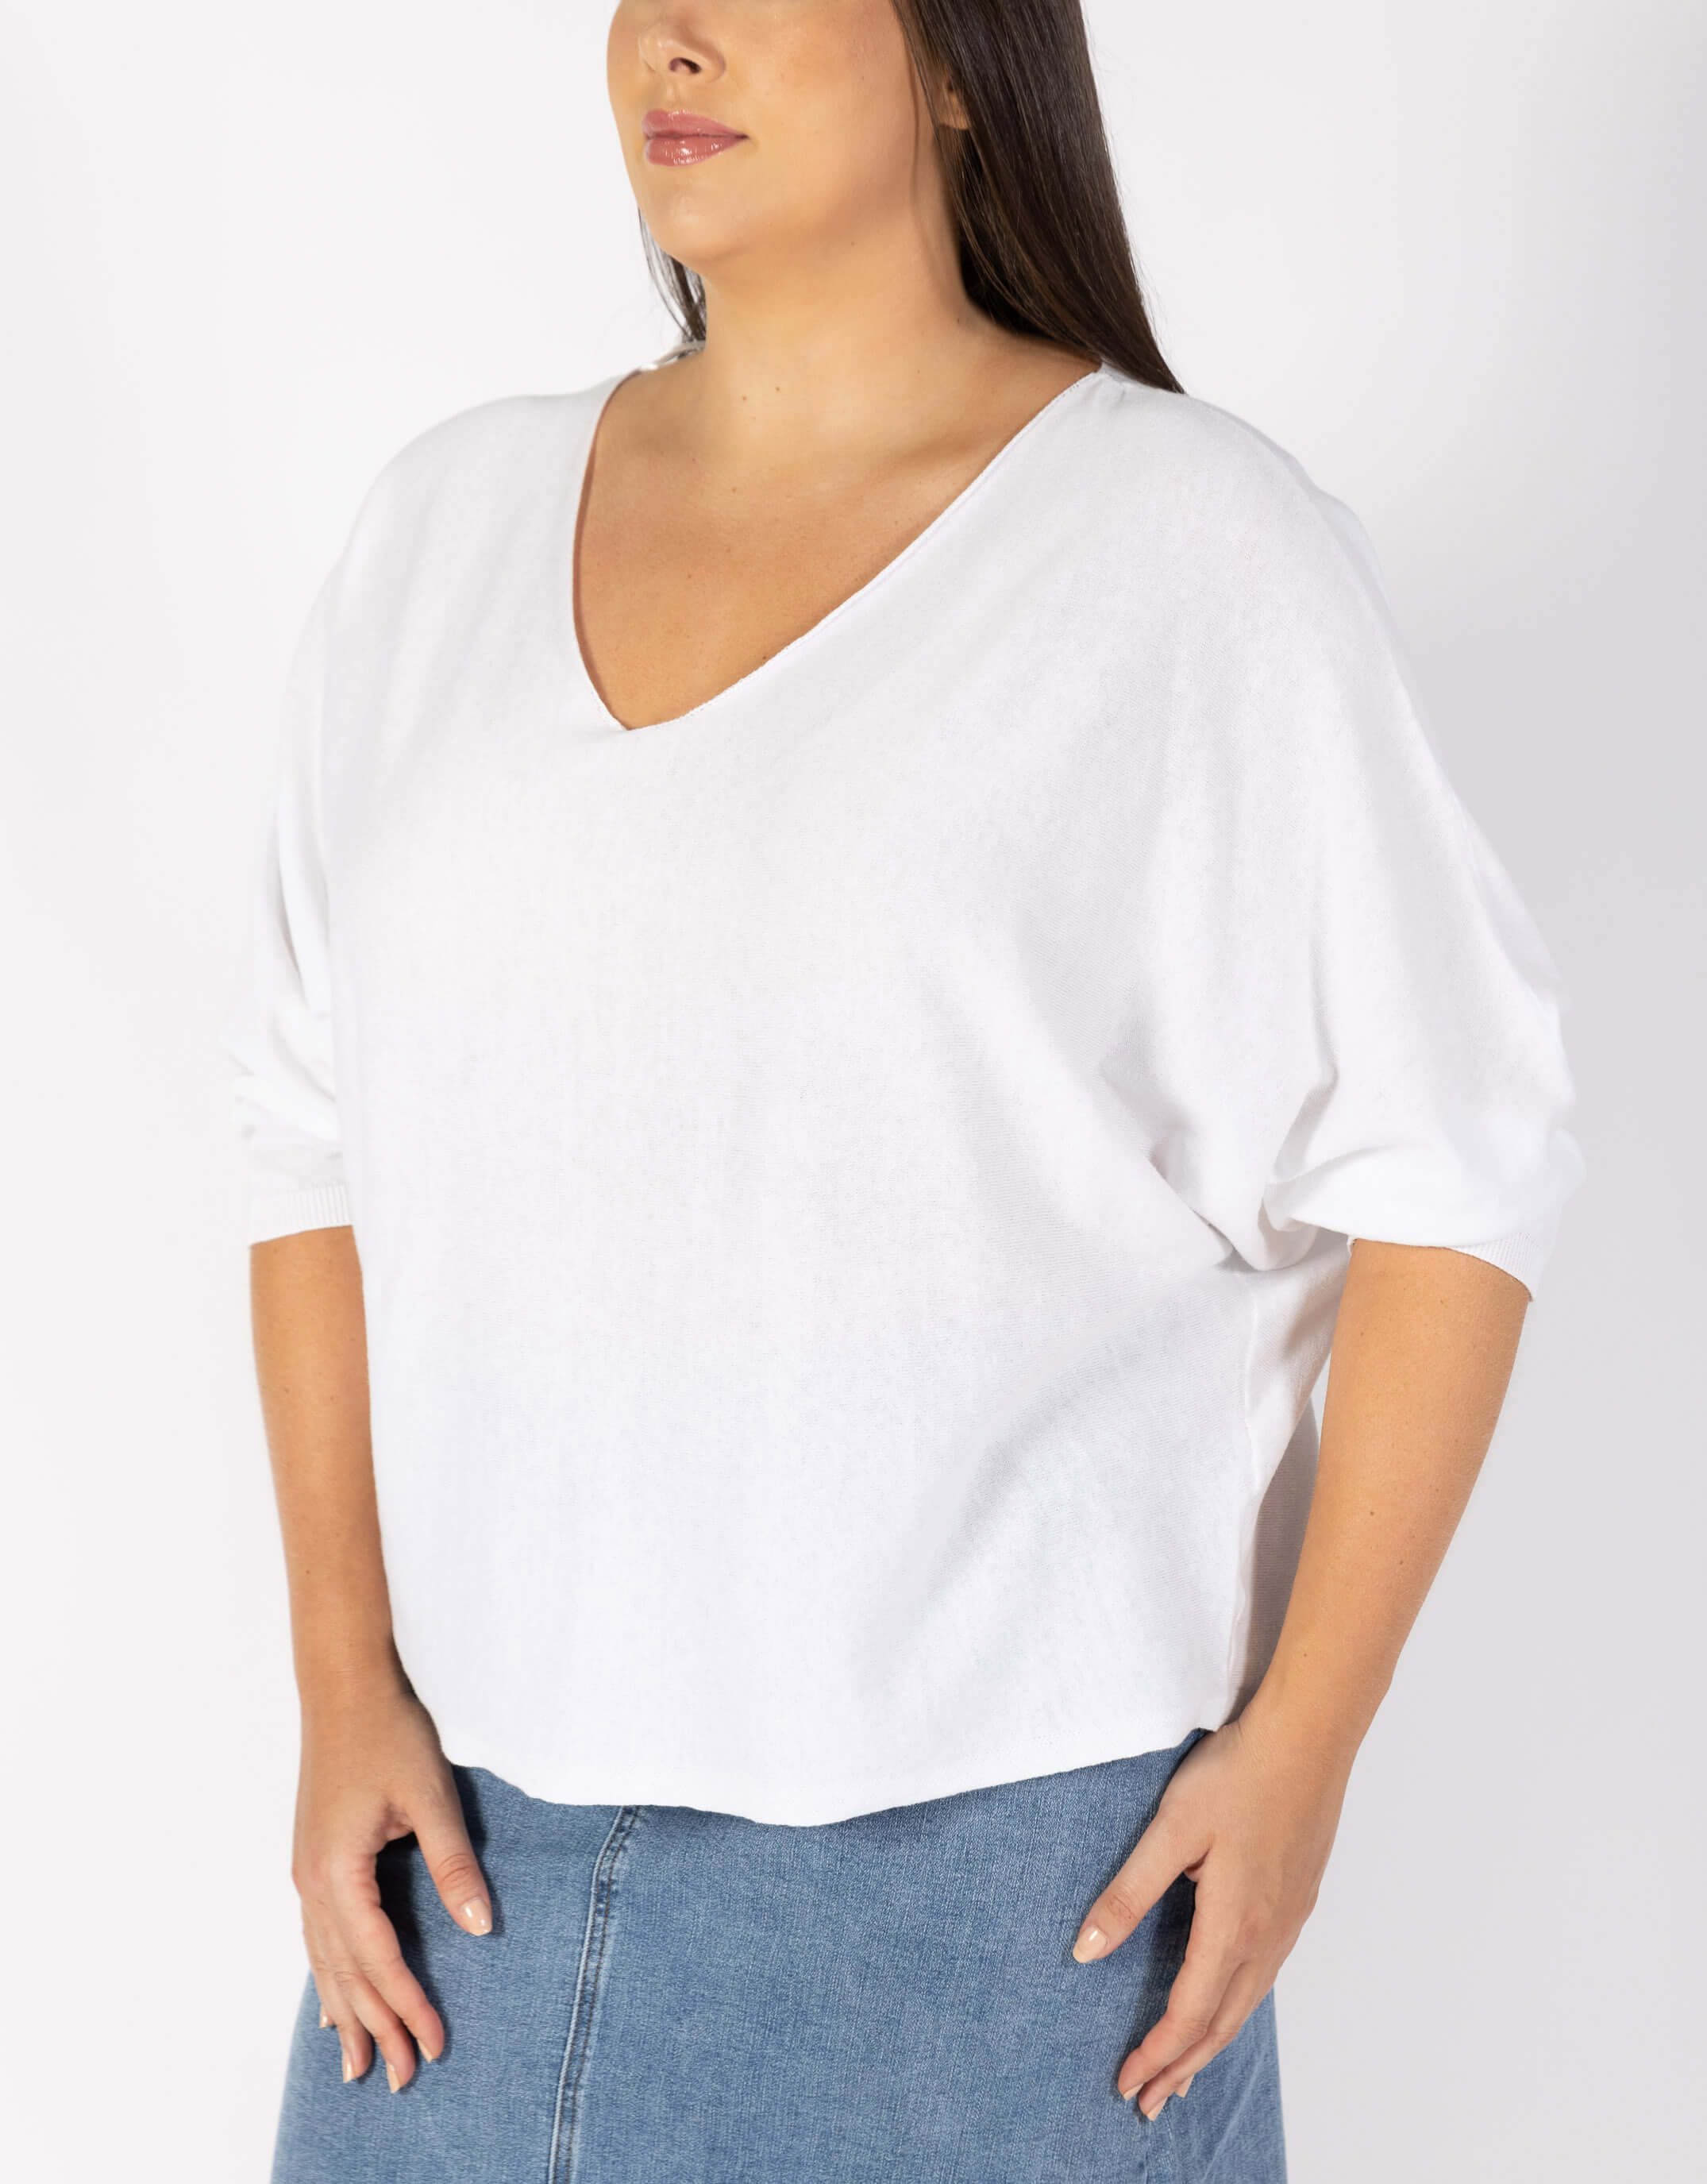 sass-clothing-plus-size-donna-knit-top-plus-size-clothing